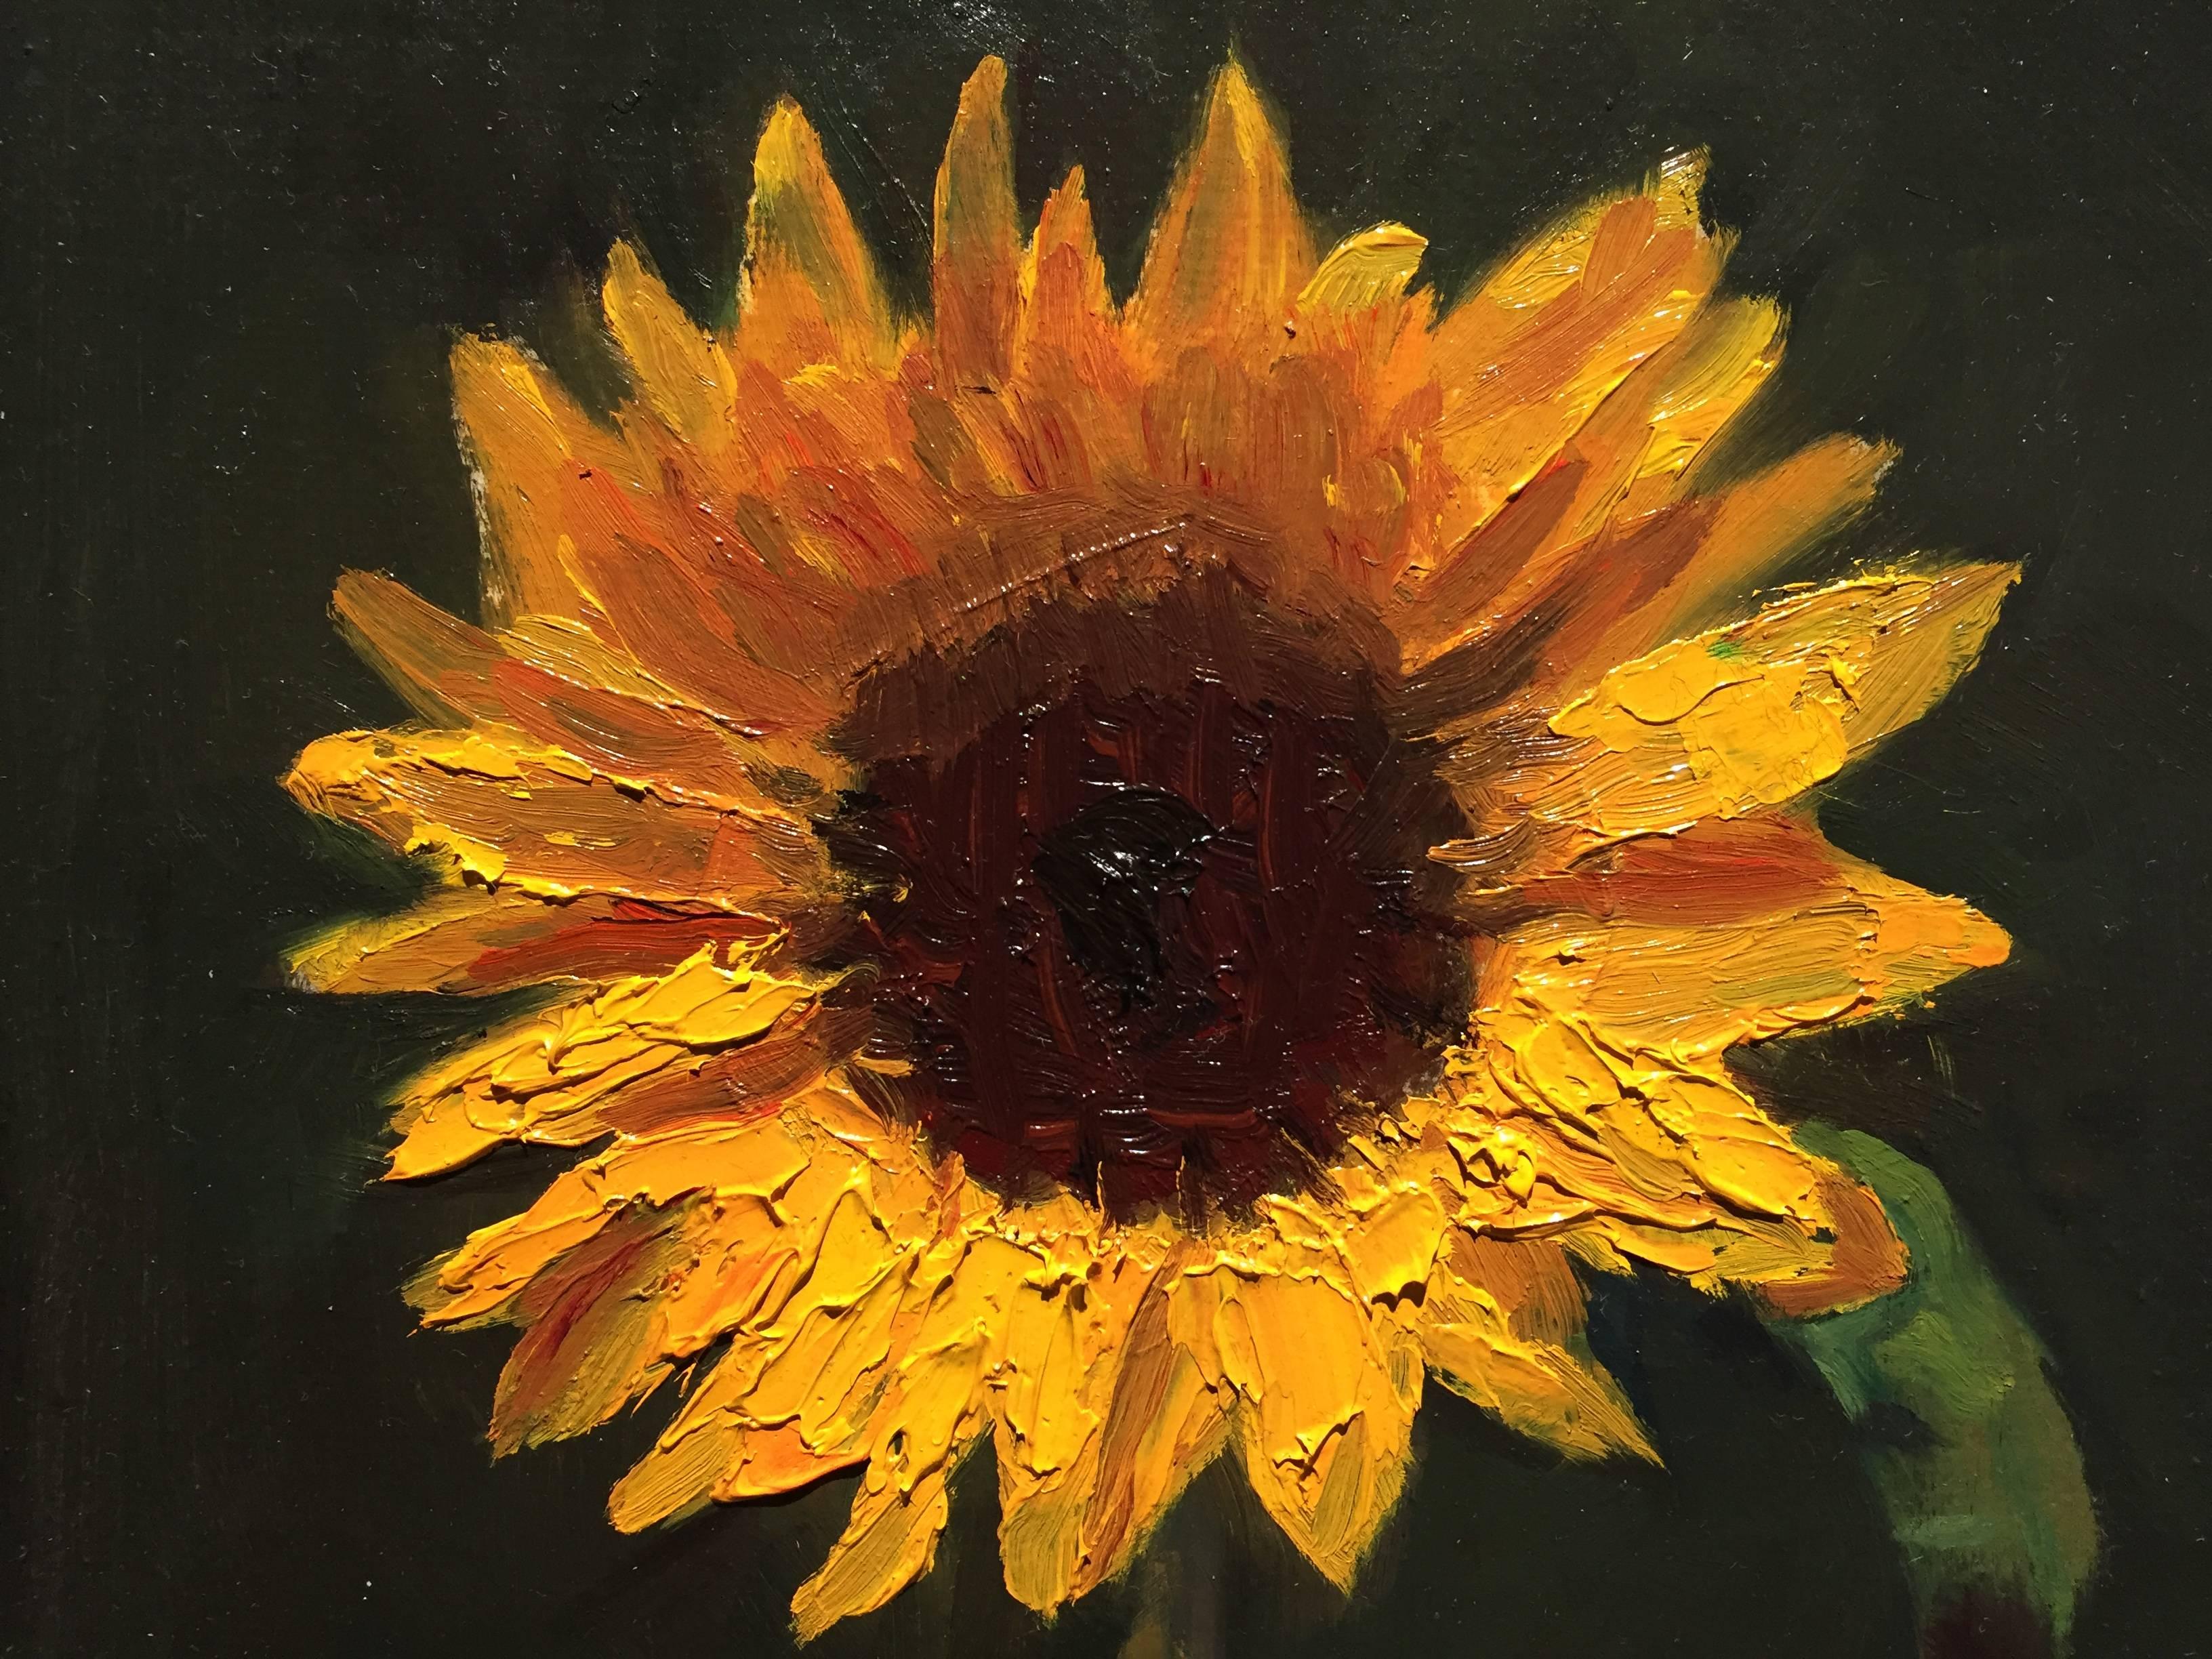 how much is the sunflower painting worth